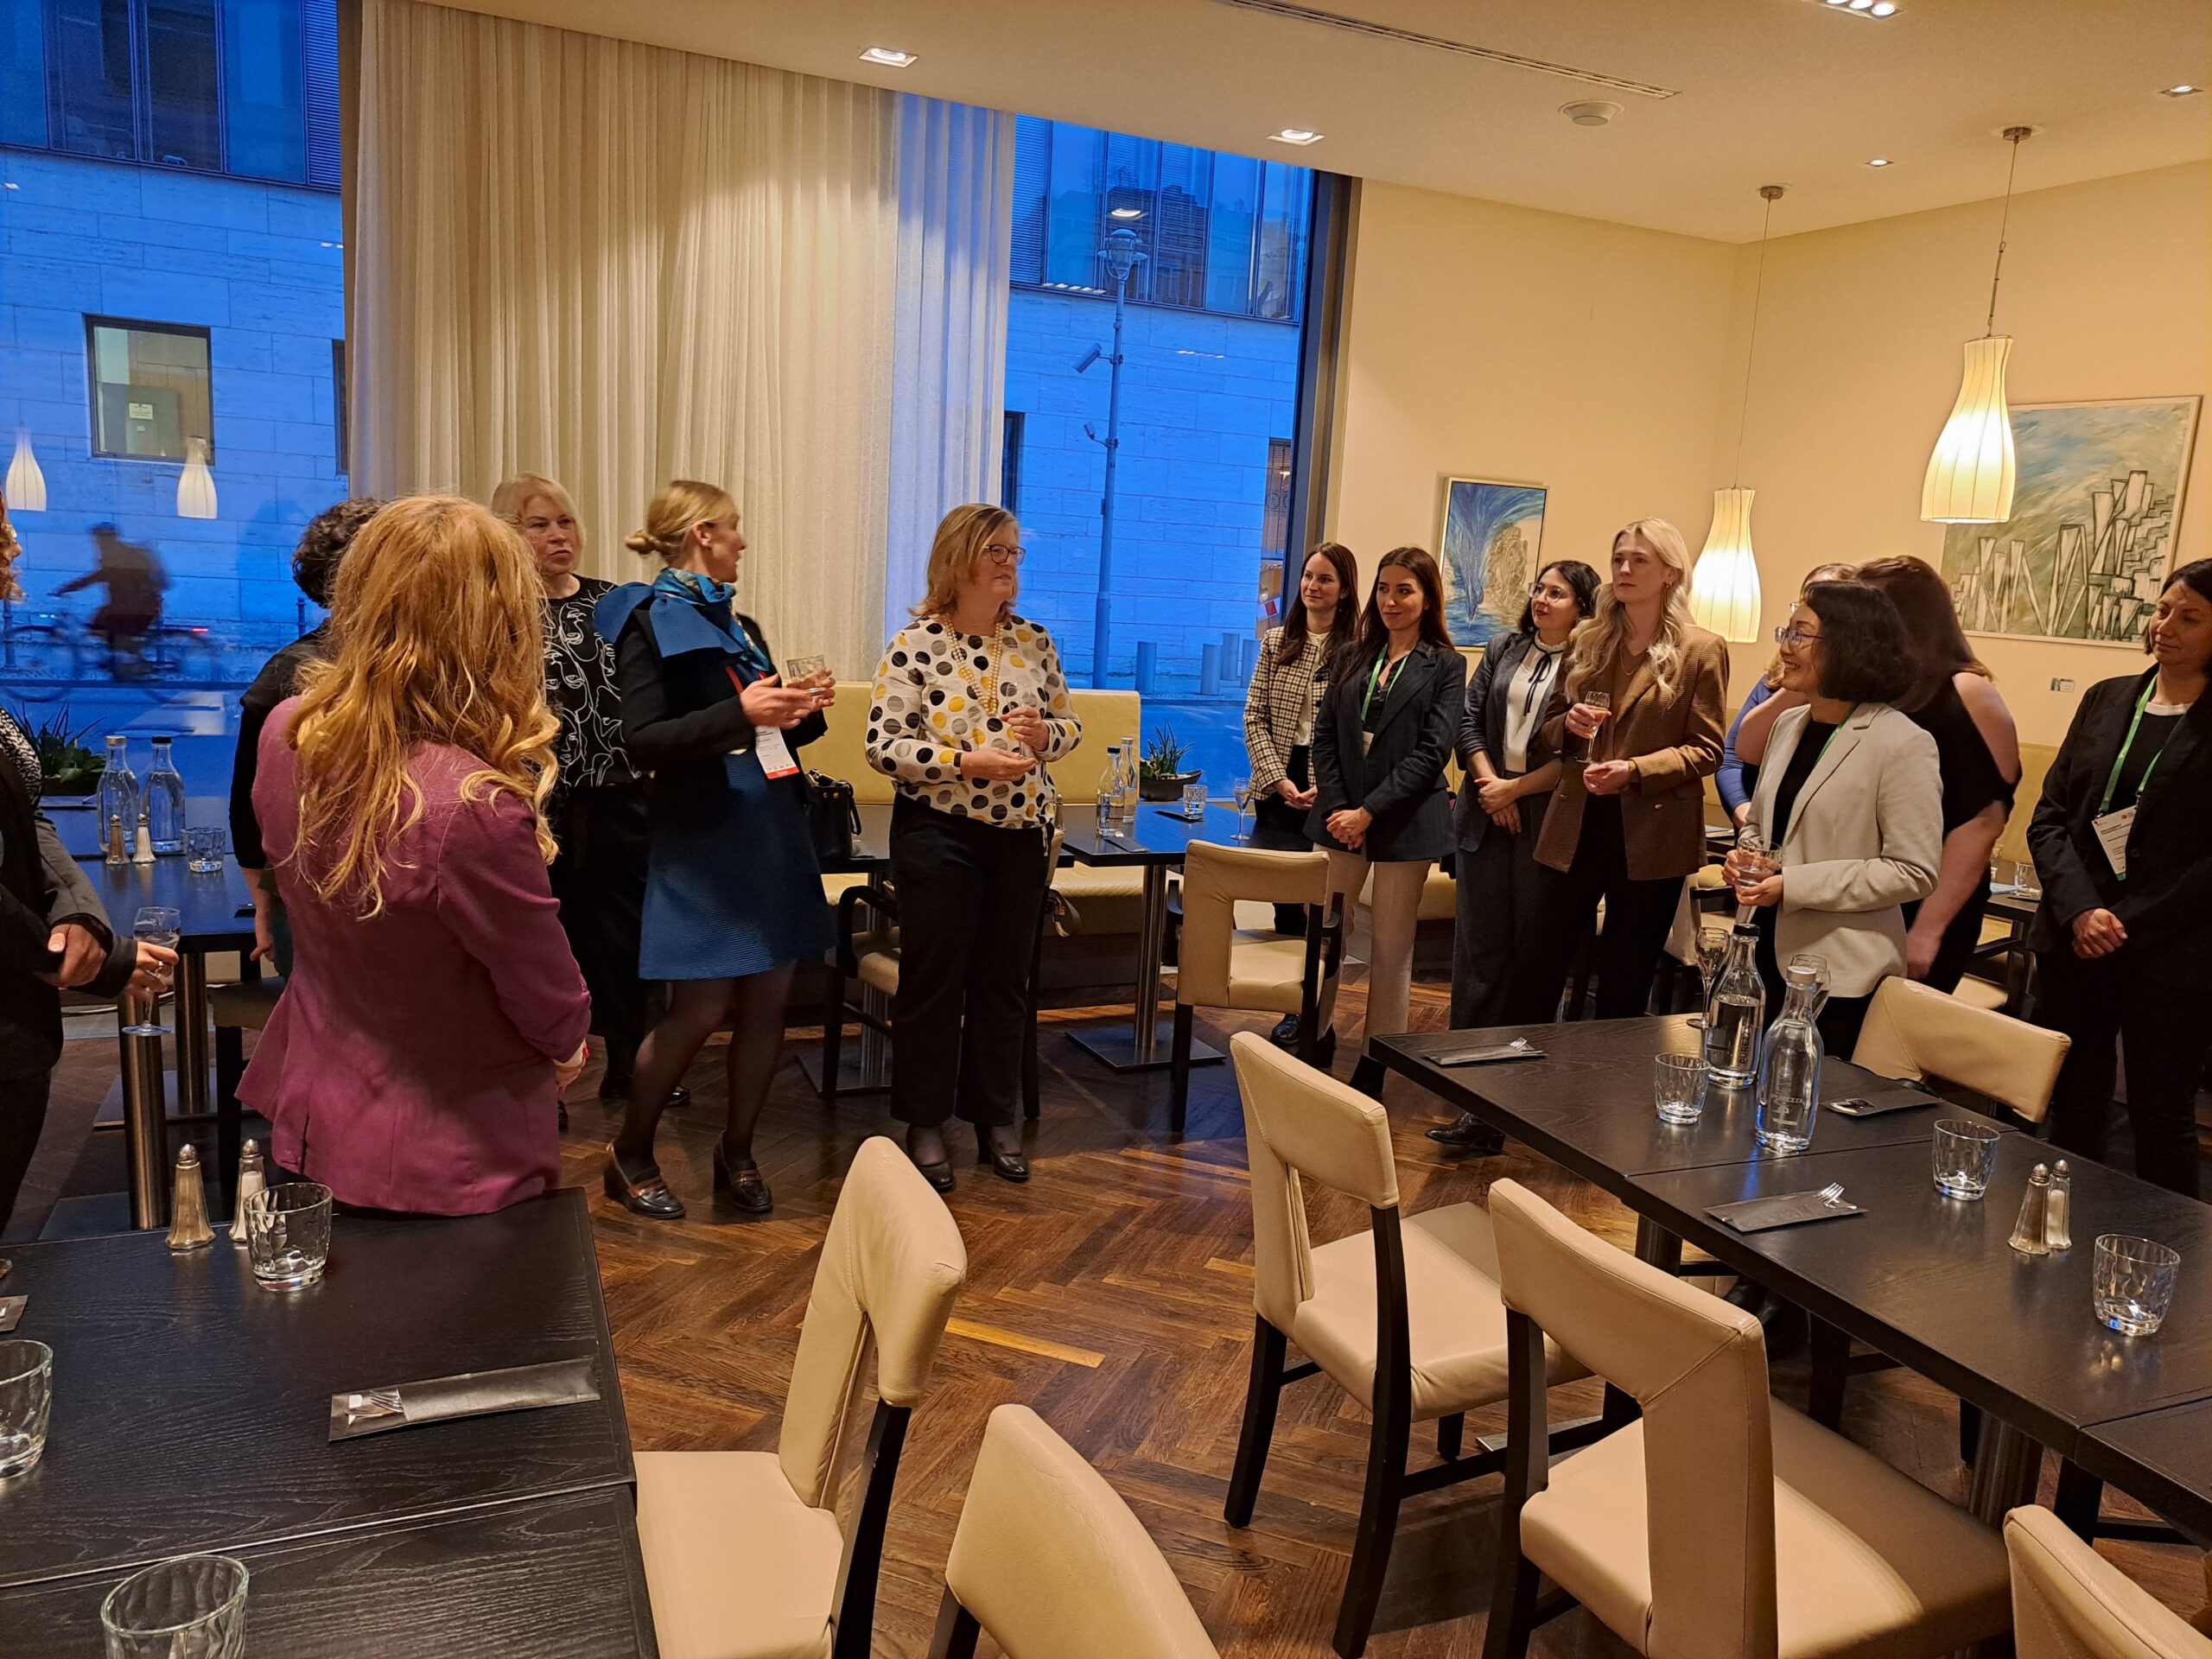 Women gathered around tables at a networking dinner, listening to the speaker